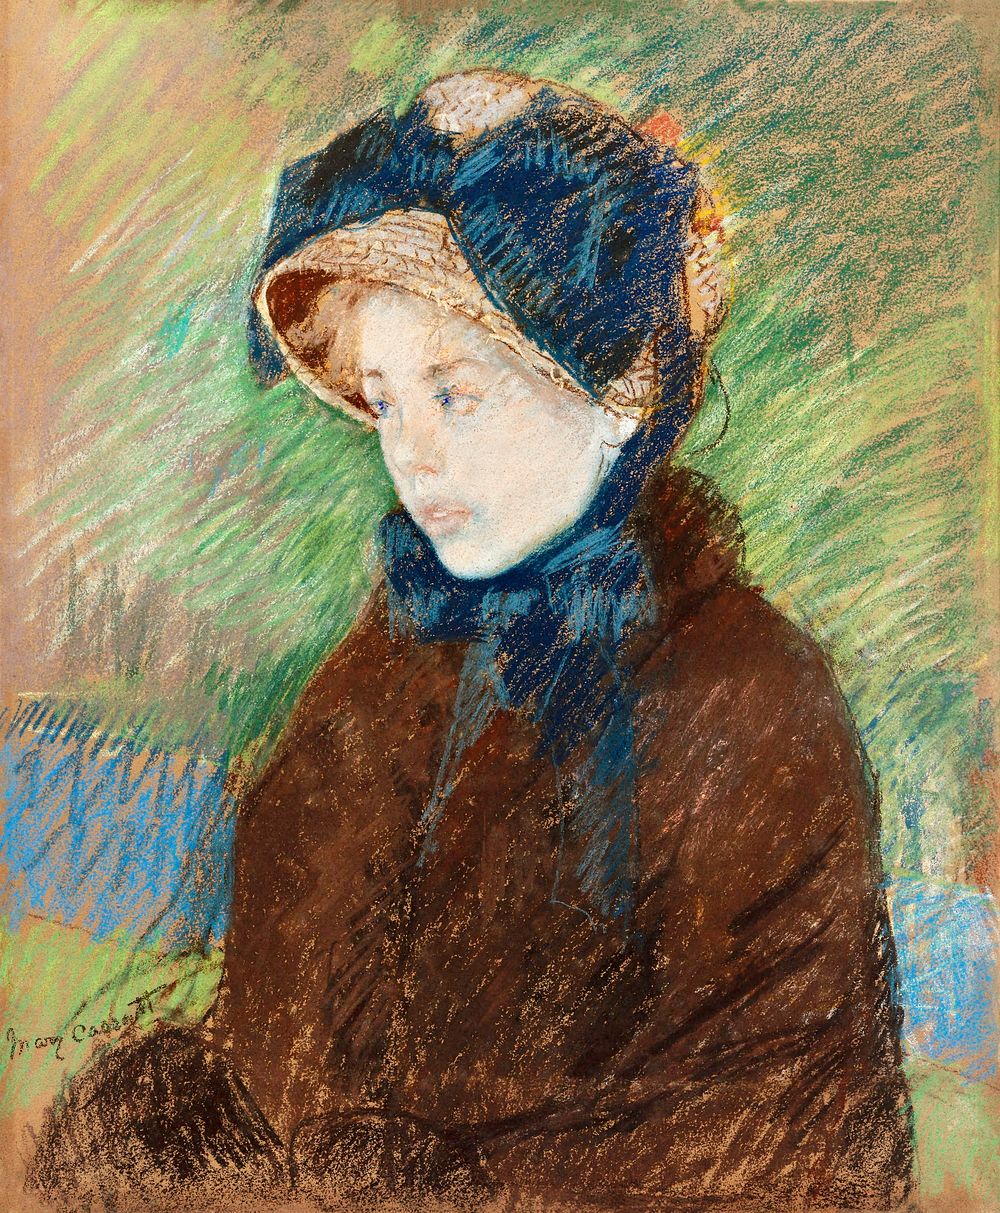 Susan in a Straw Bonnet (1883) by Mary Cassatt. Original woman portrait painting from The Art Institute of Chicago.…